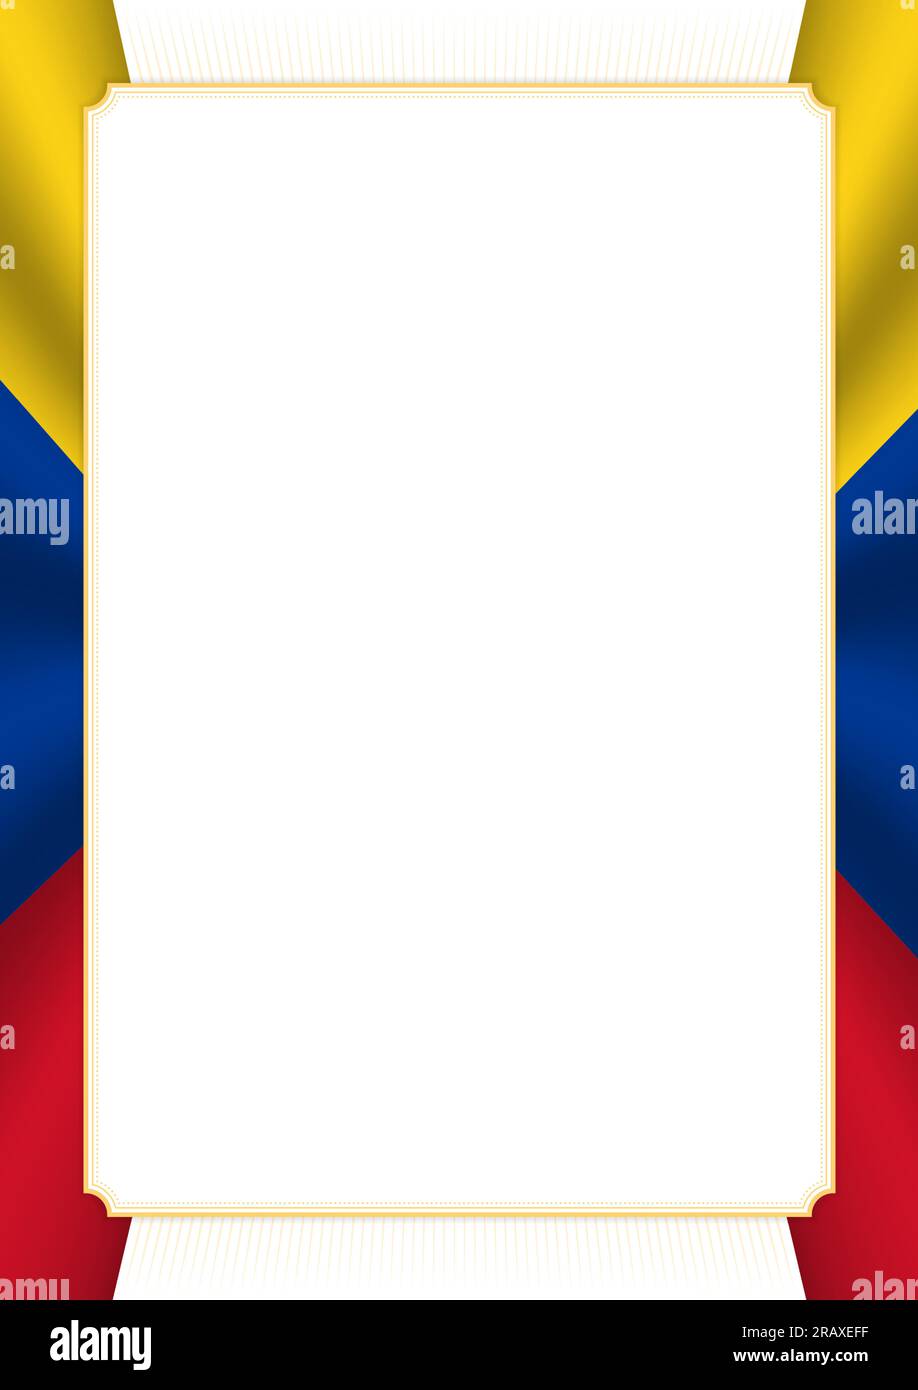 Vertical frame and border with colors of Colombia flag, template ...